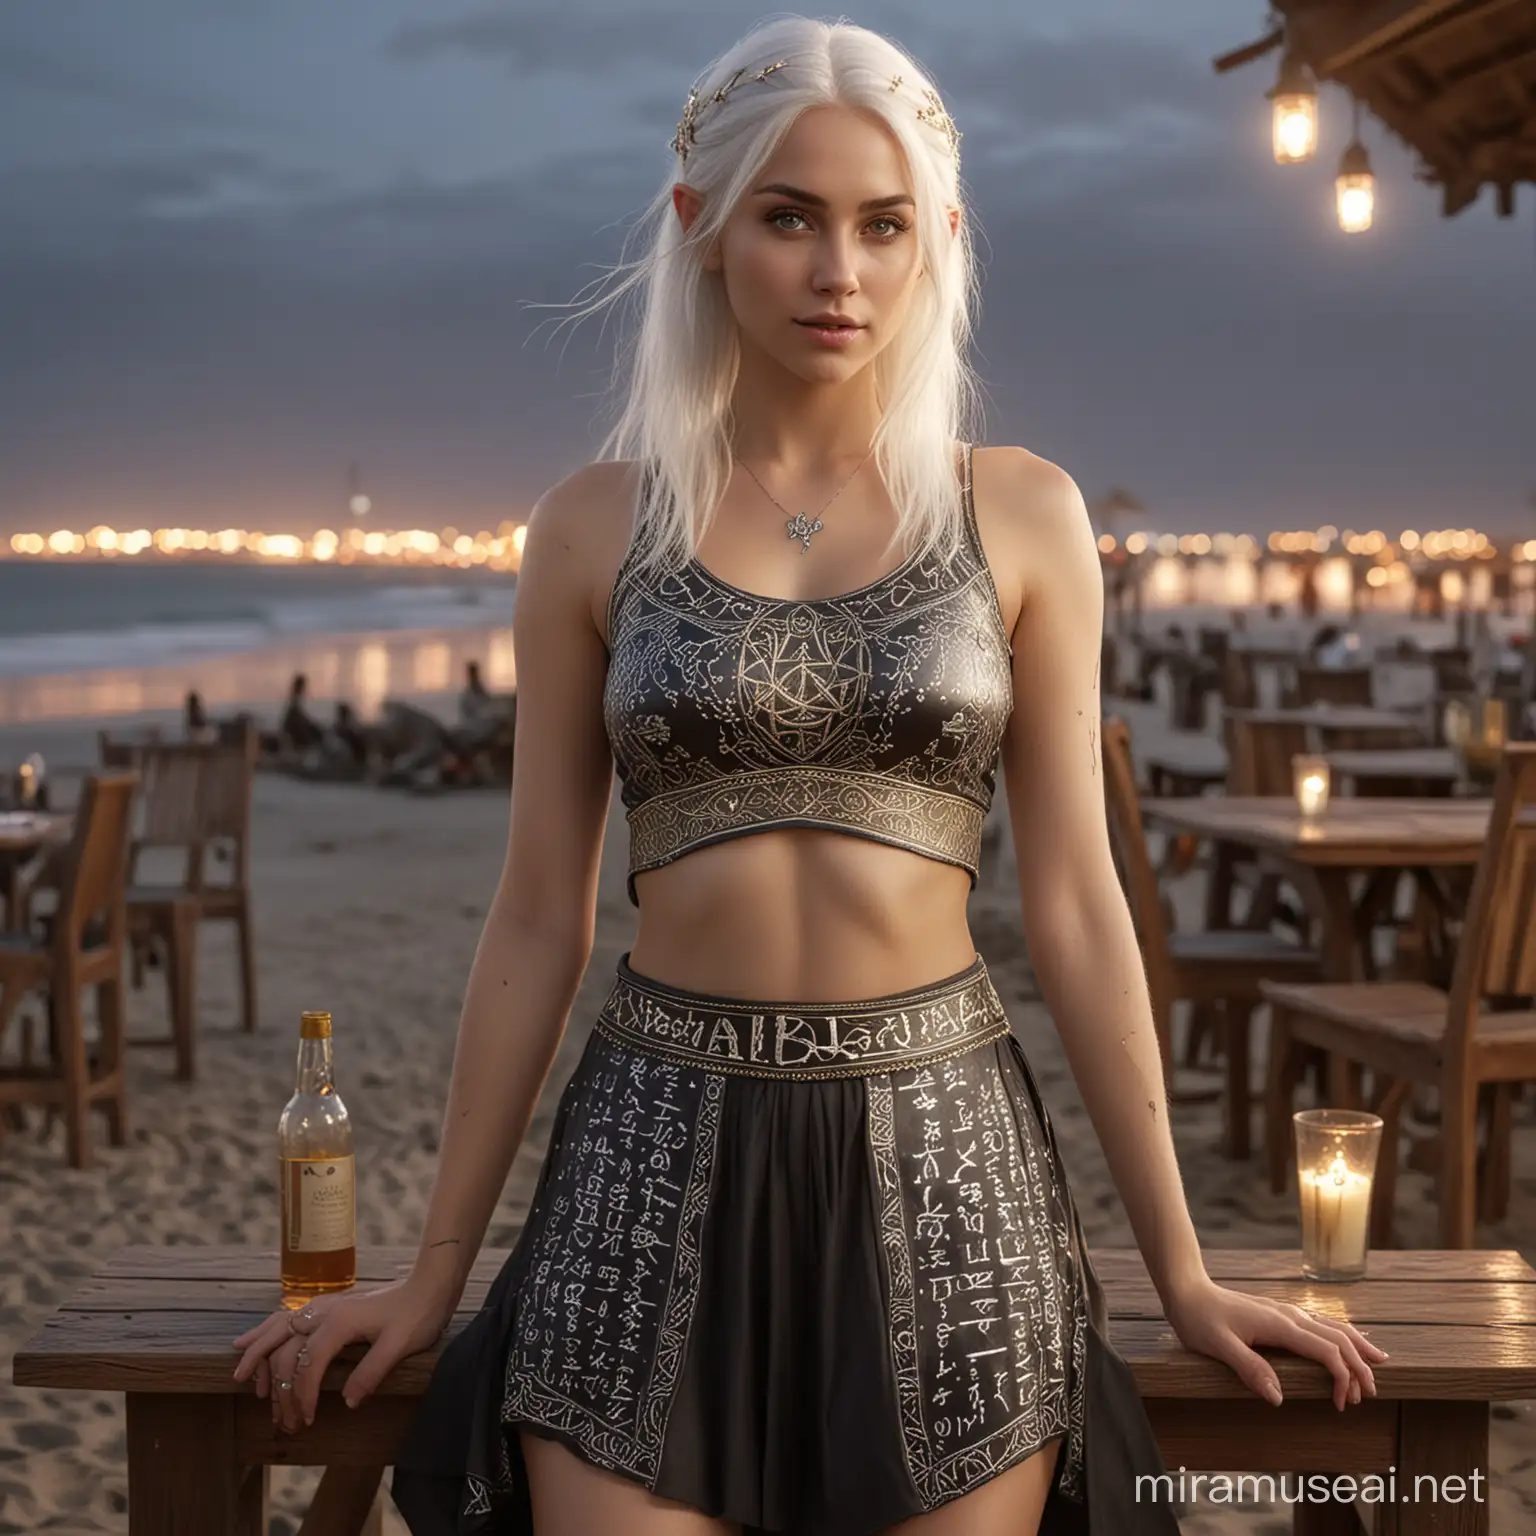 Elveninspired Beach Evening Woman with White Hair and Silver Accents